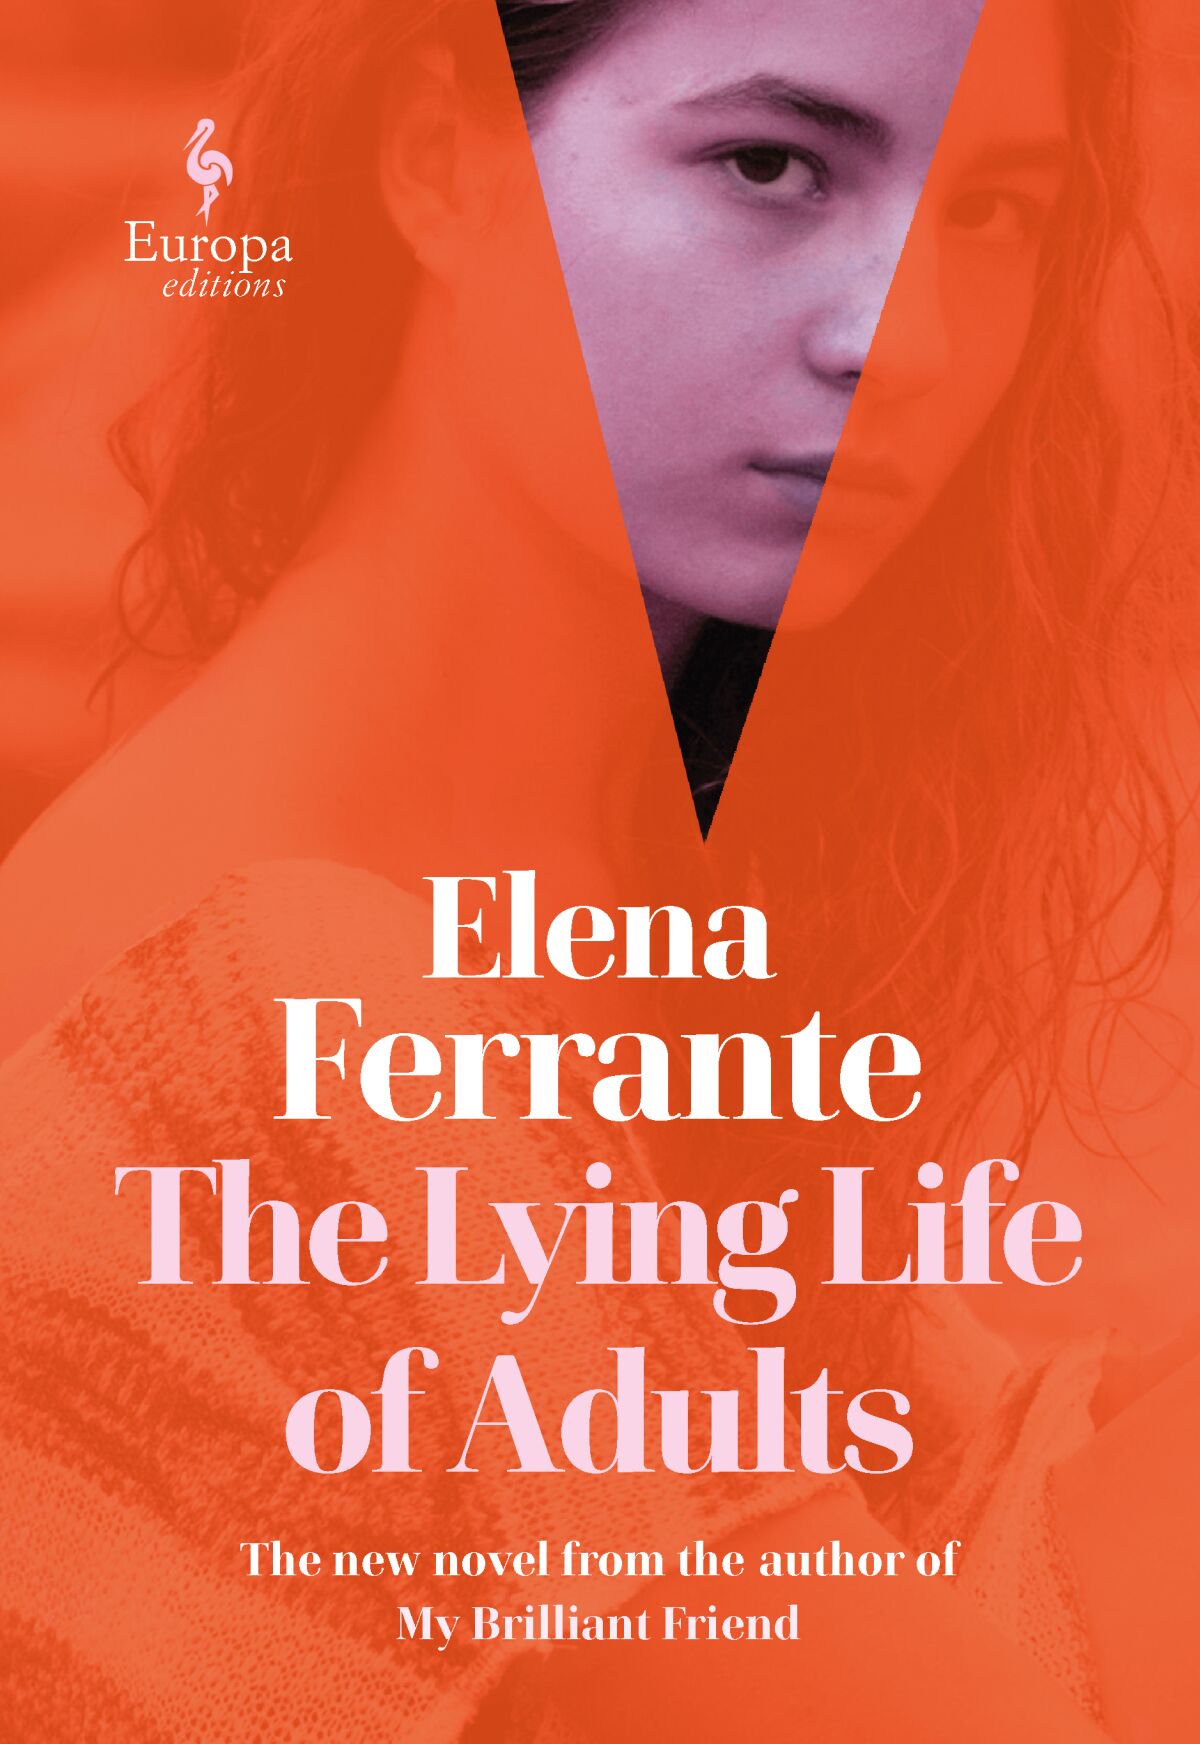 Book jacket for “The Lying Life of Adults” by Elena Ferrante.